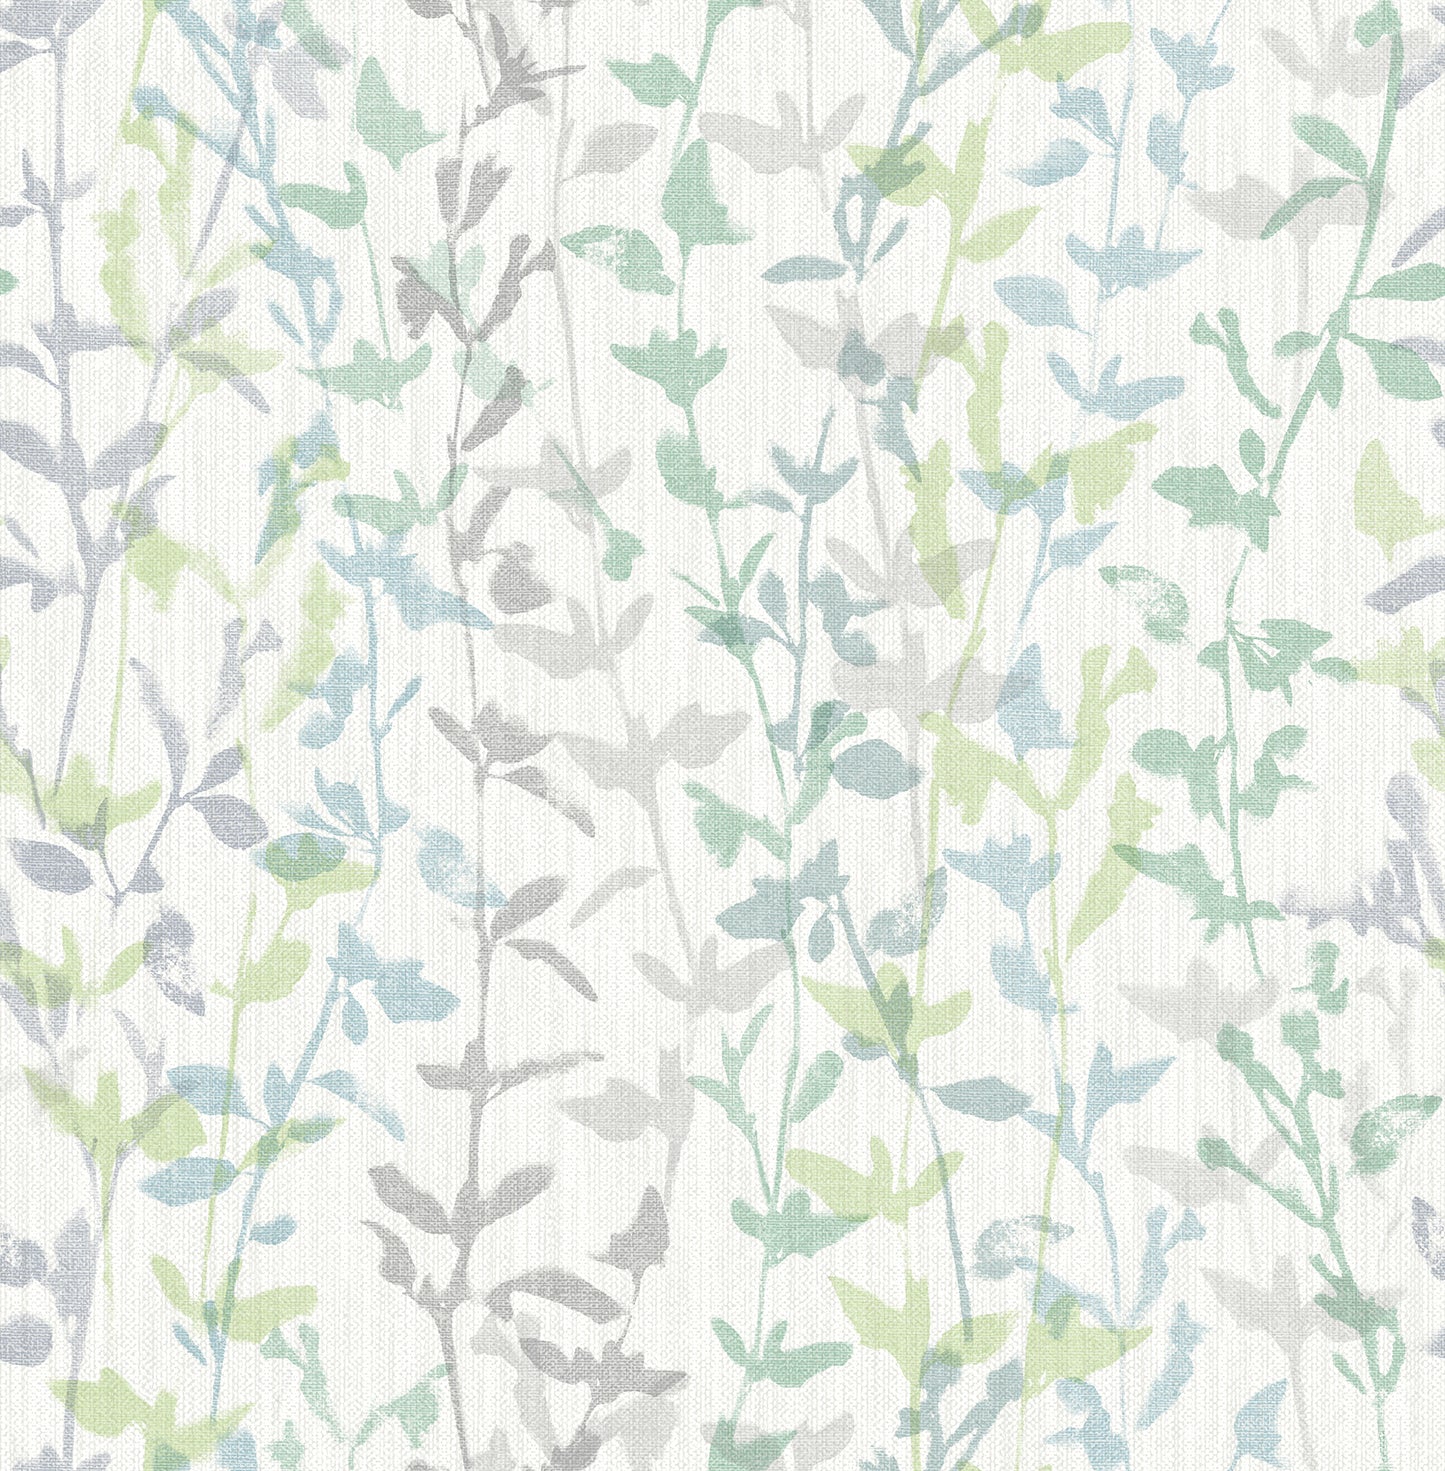 Looking for 2964-25937 Scott Living Thea Green Floral Trail Green A-Street Prints Wallpaper